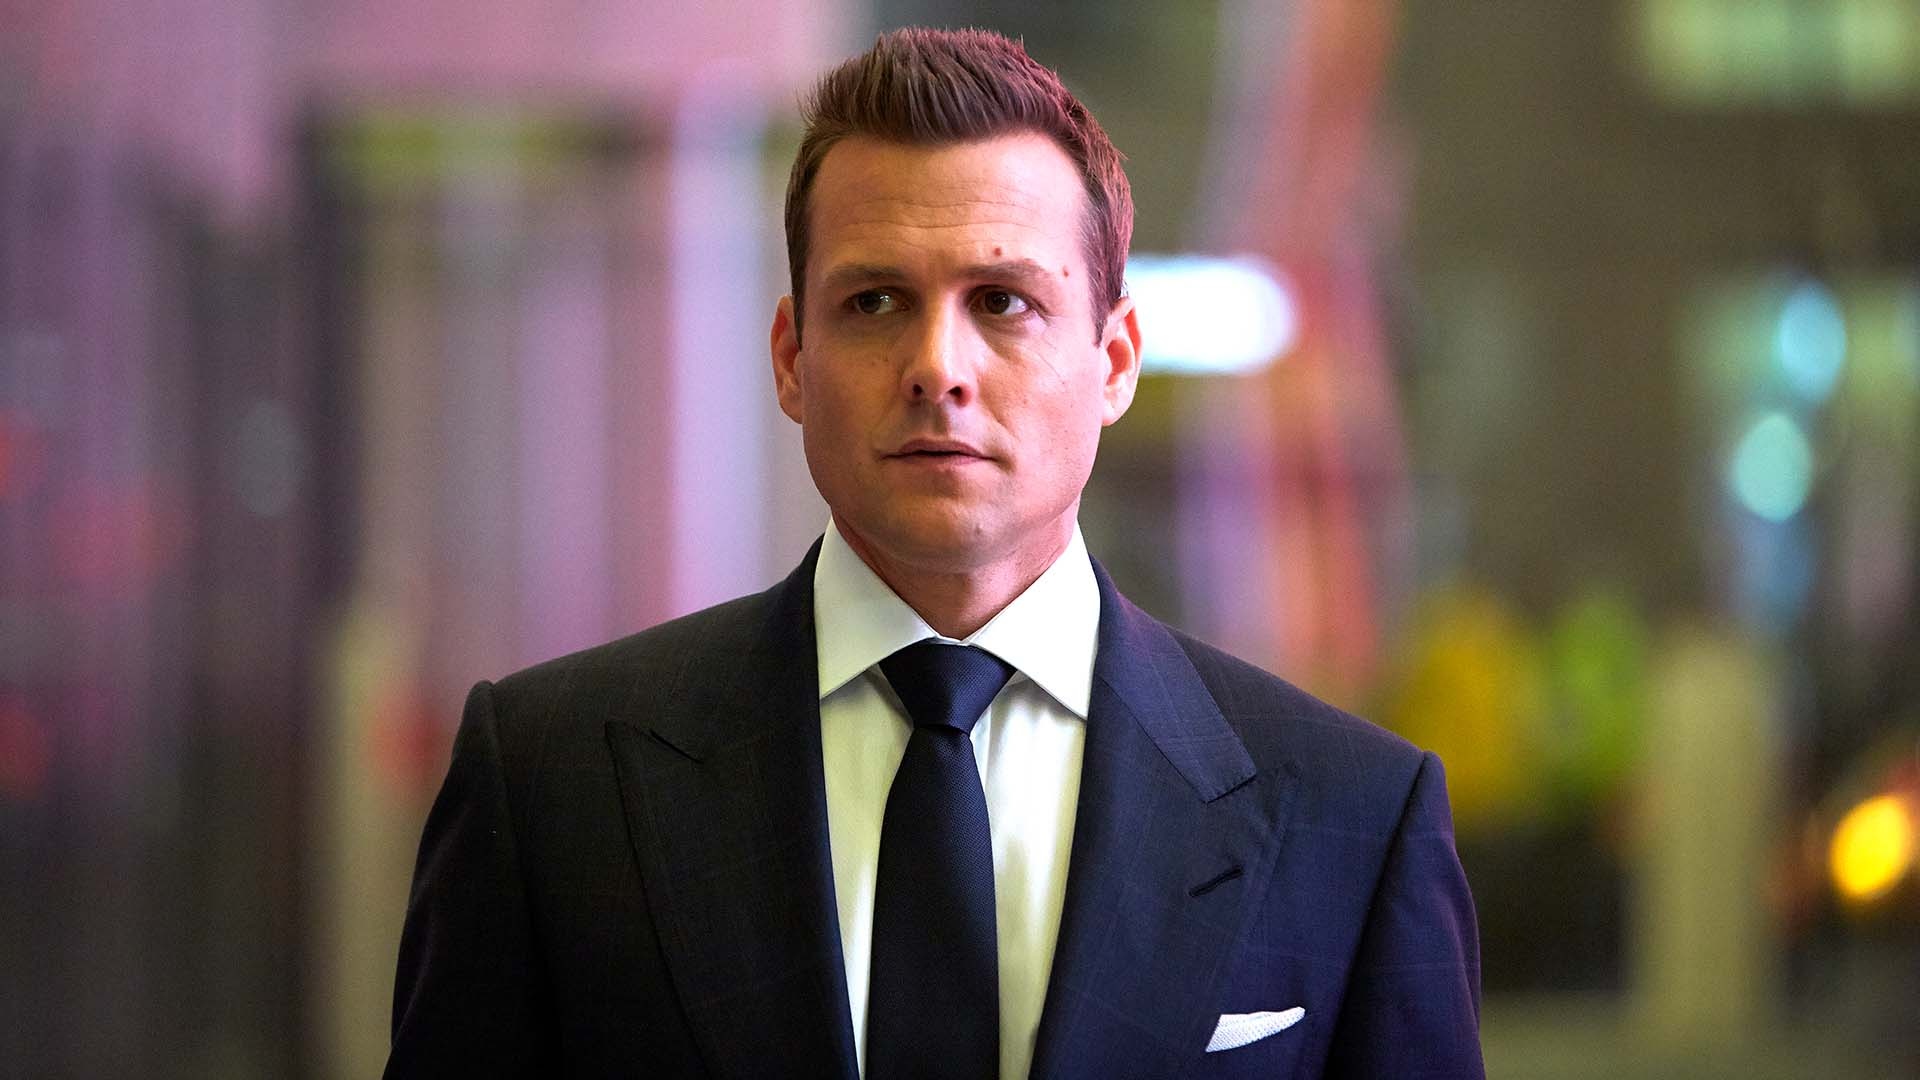 Harvey Specter, Enigmatic personality, TV show character, 1920x1080 Full HD Desktop